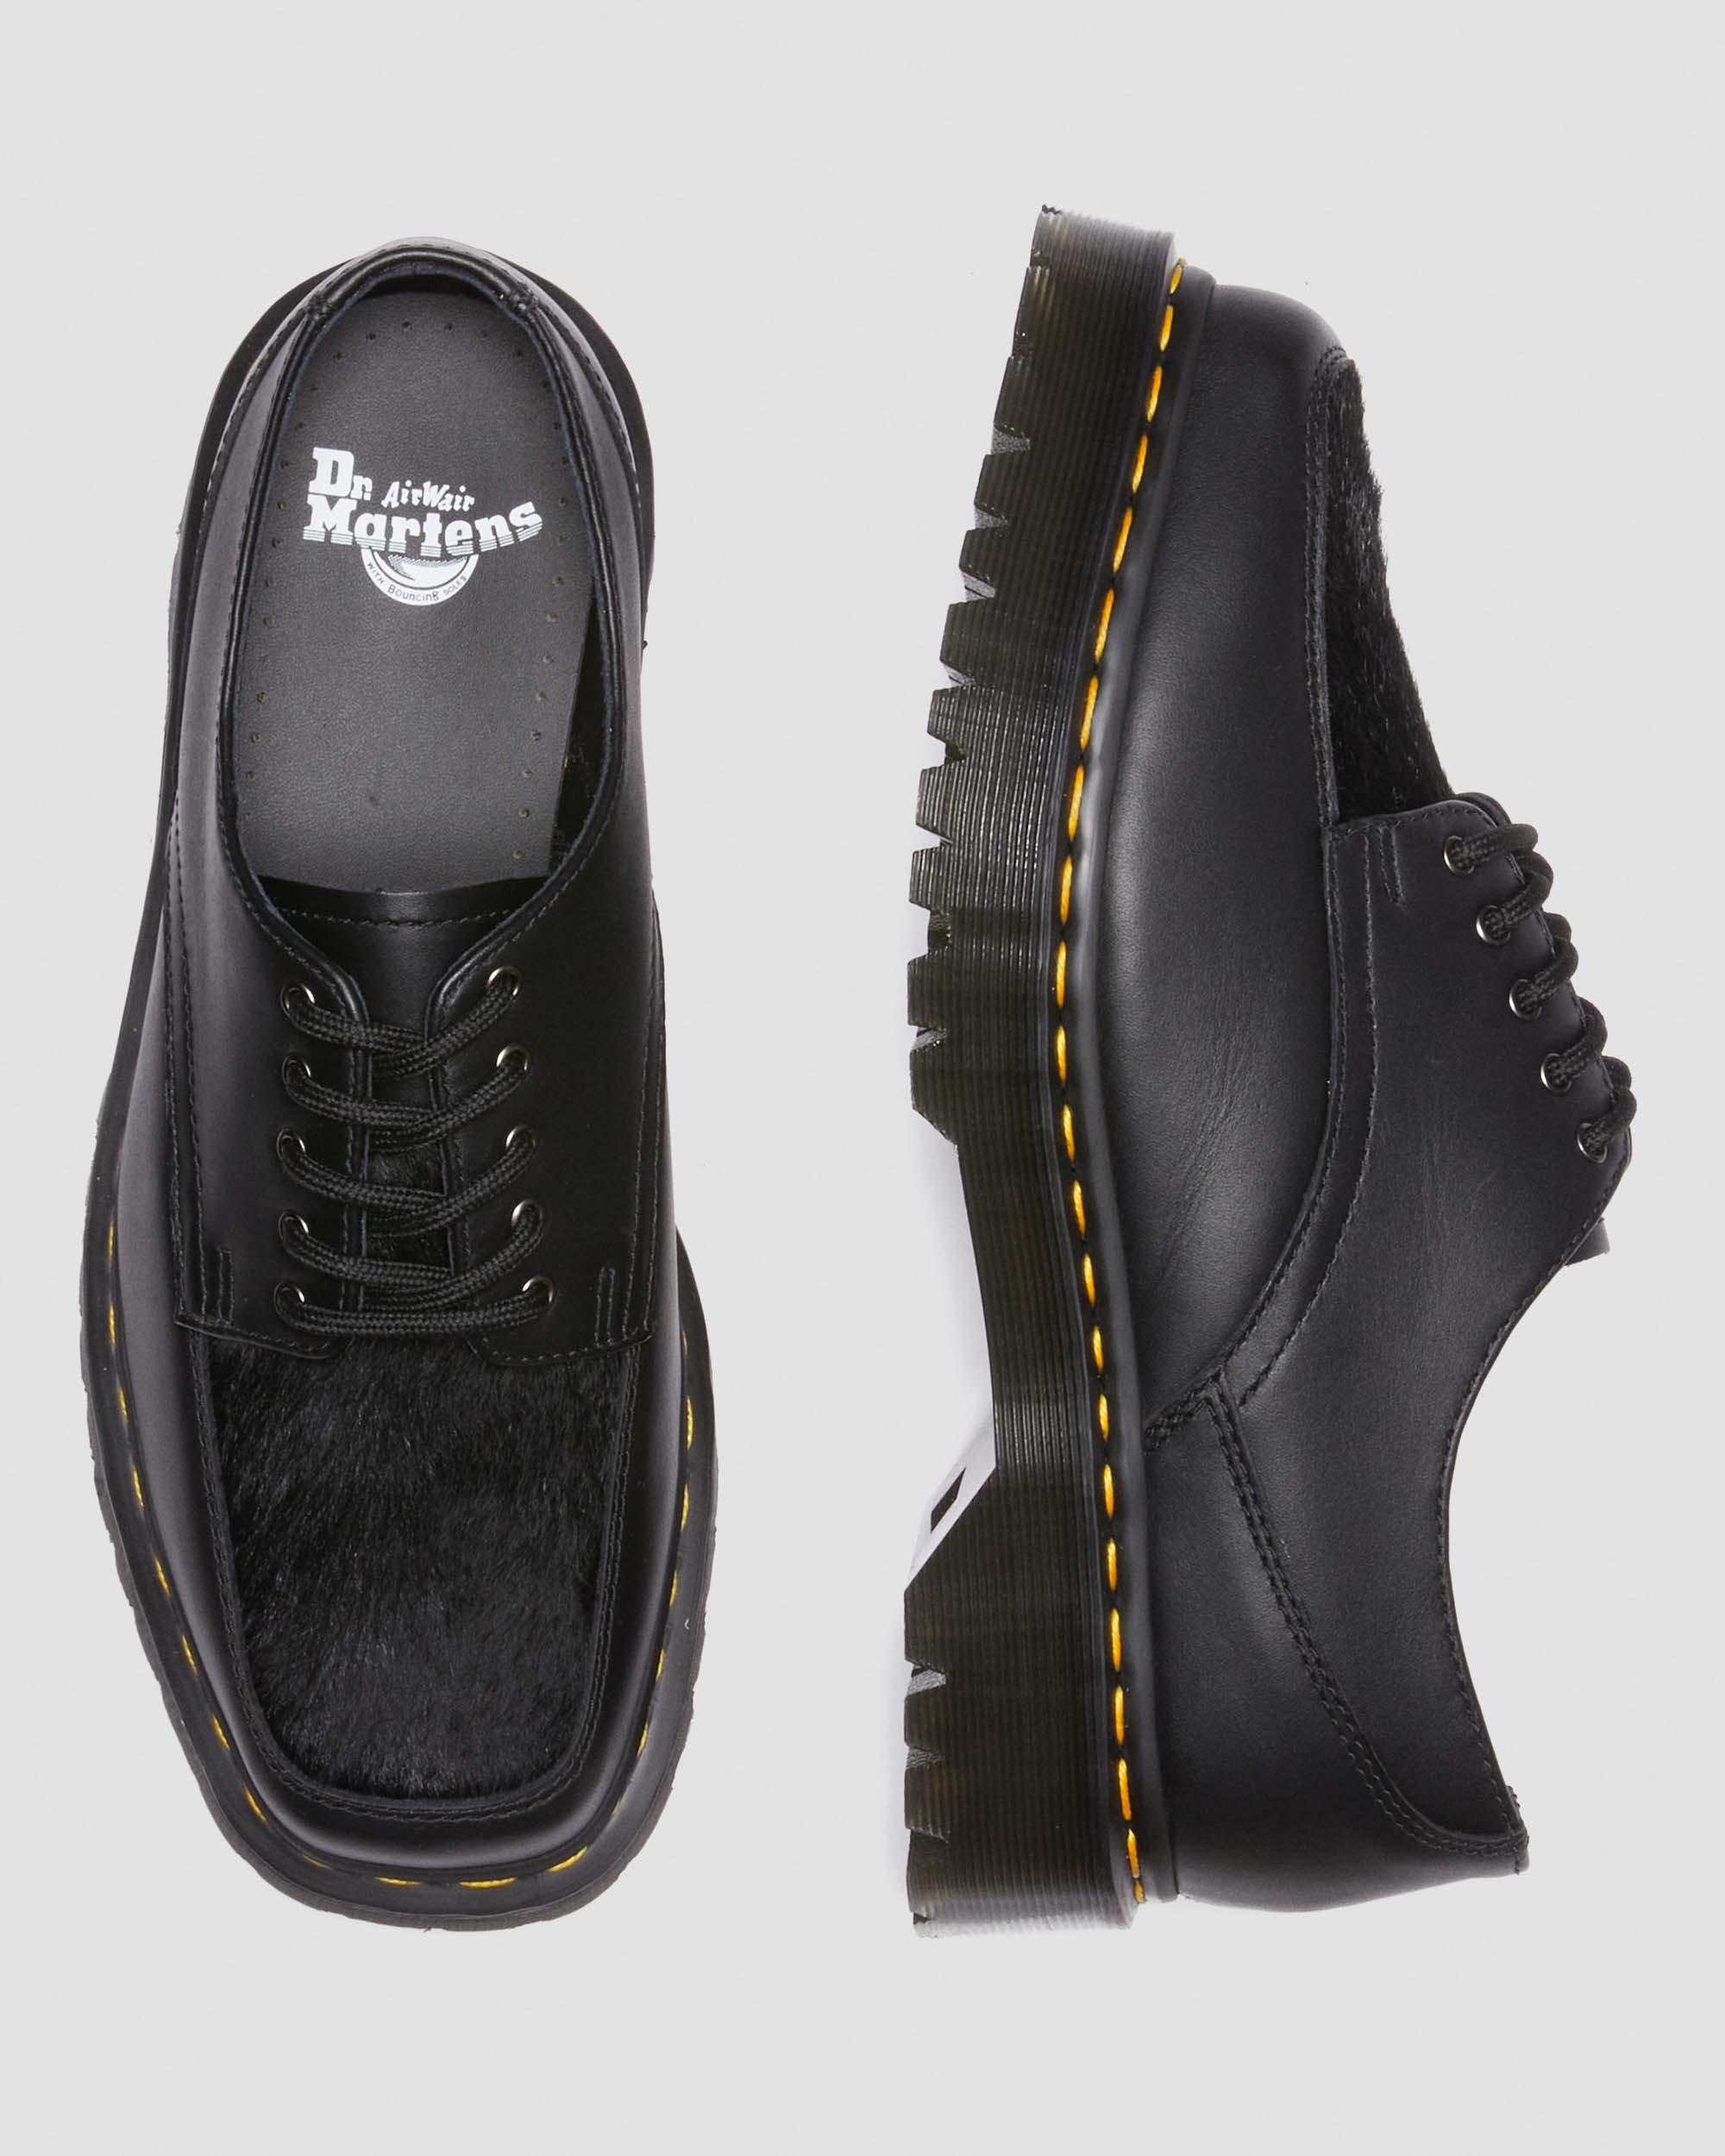 5-Eye Bex Square Toe Hair-On & Leather Shoes in Black | Dr. Martens